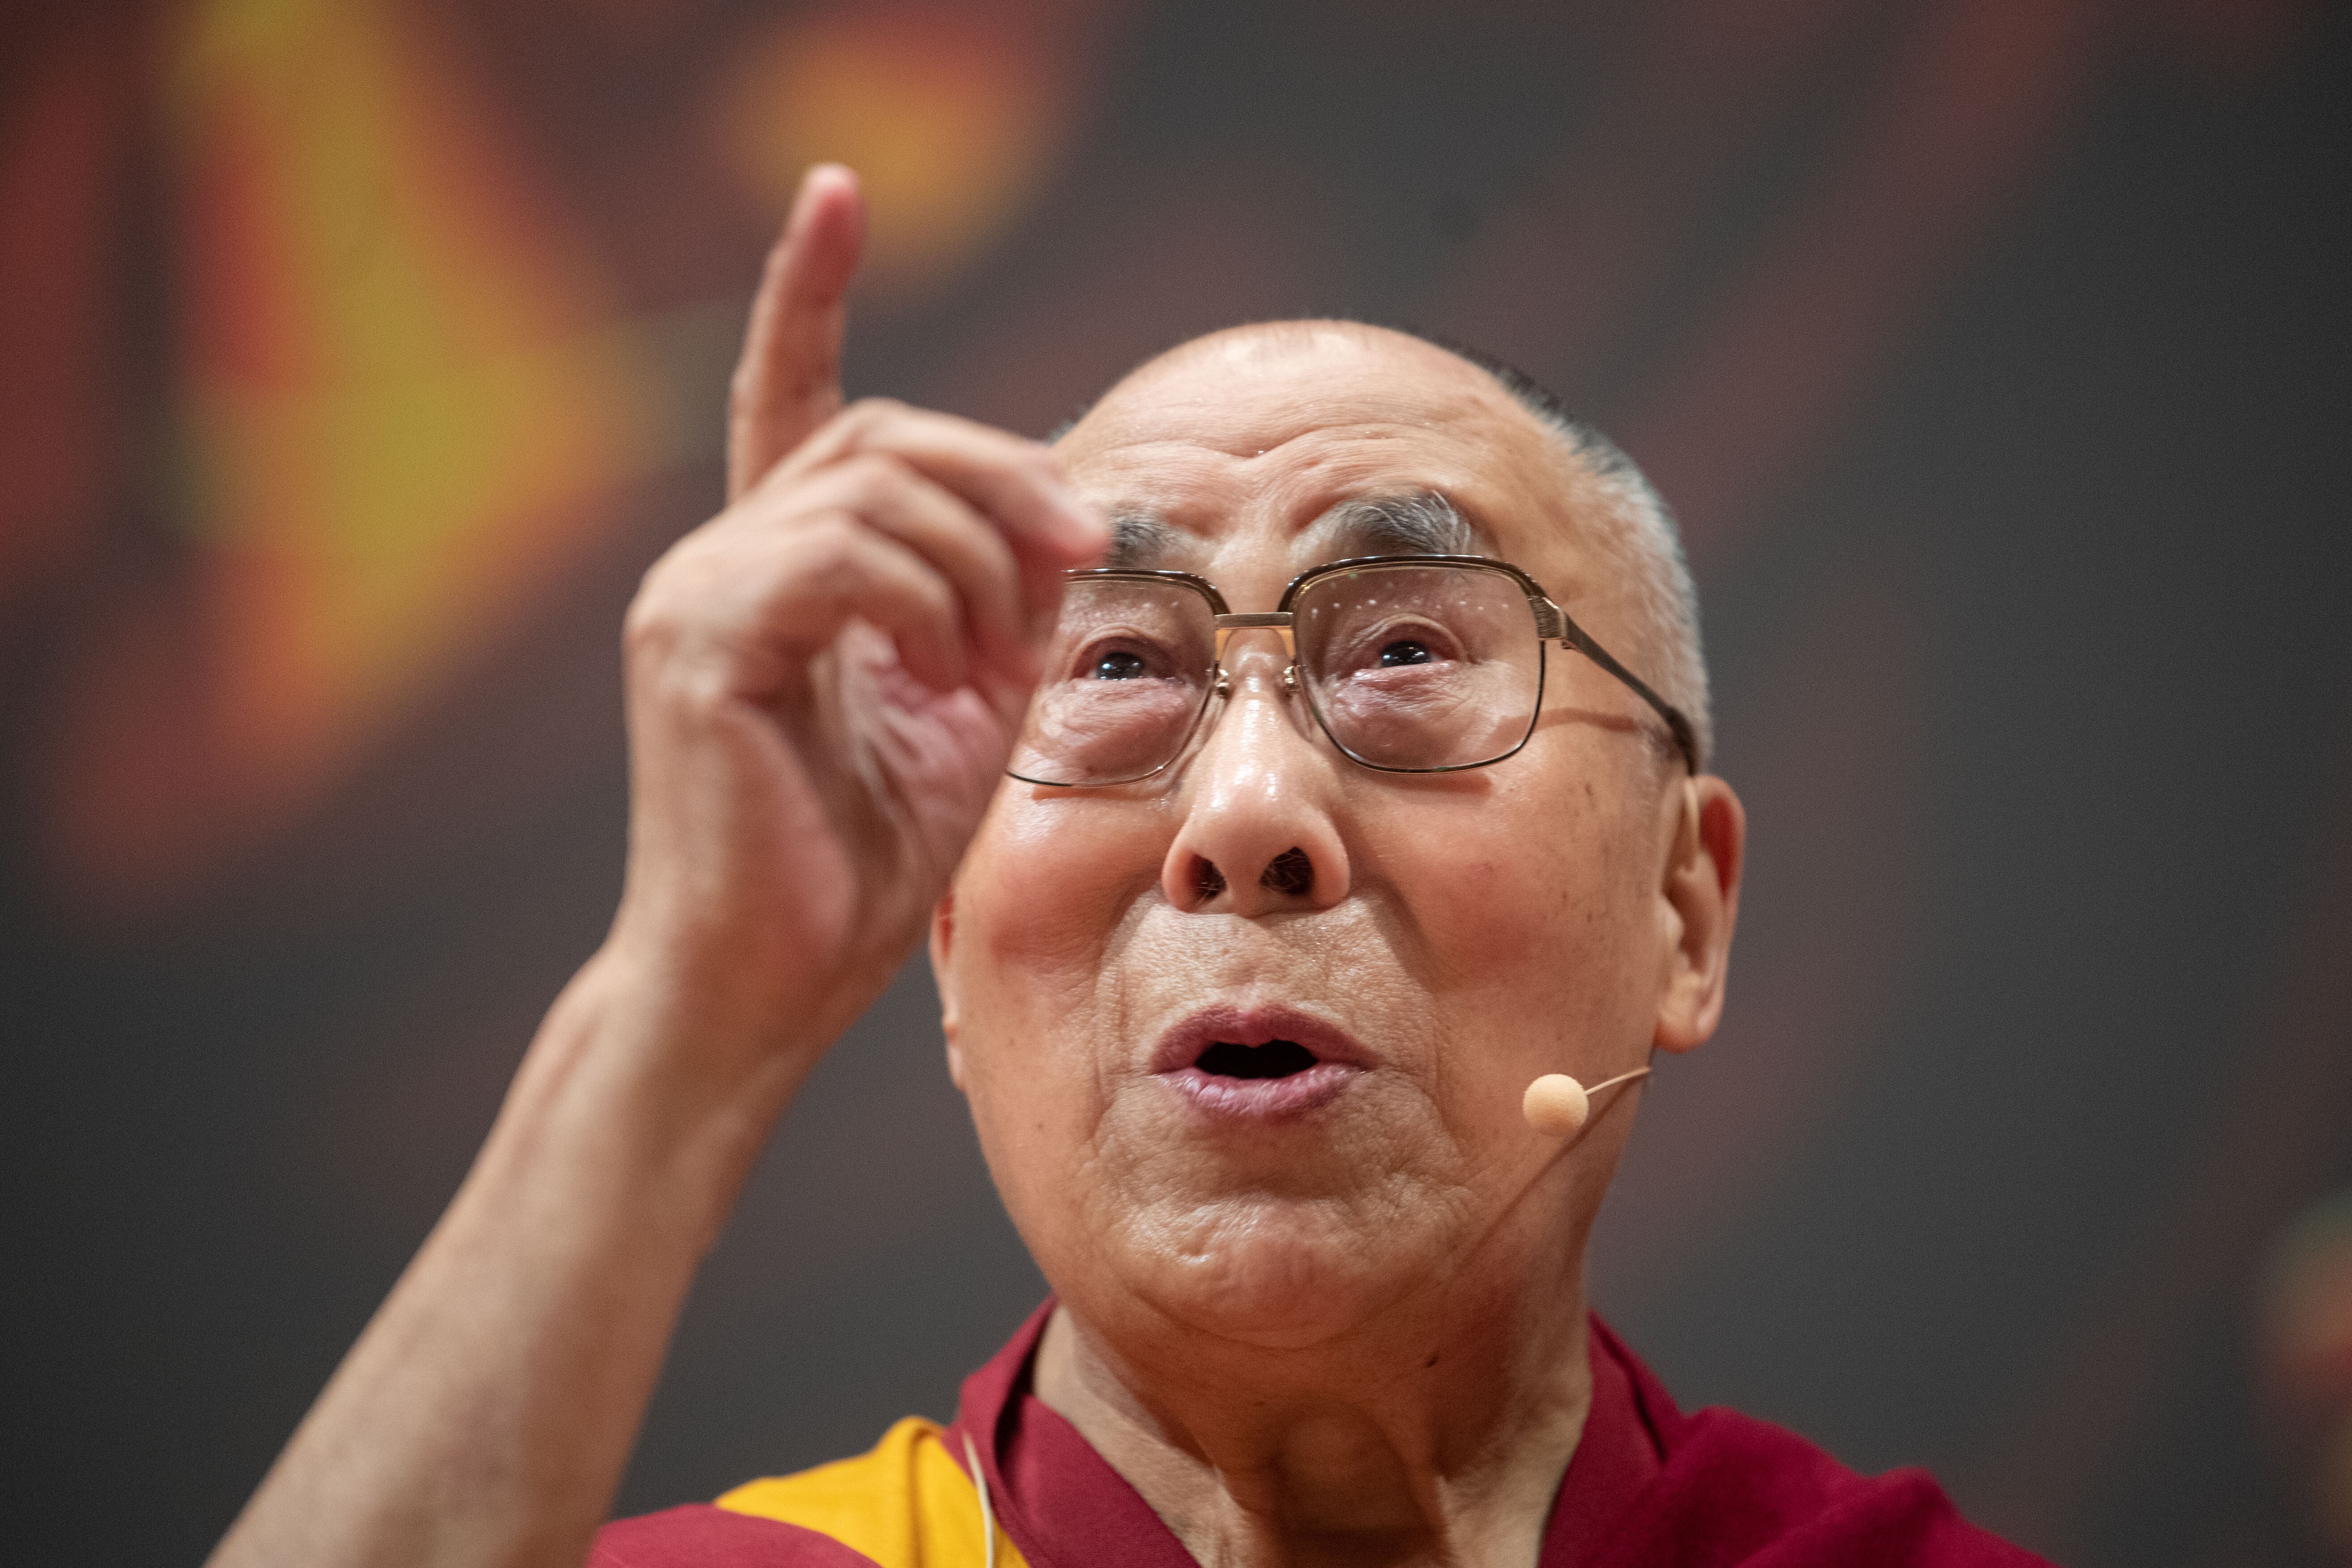 The Dali Lama has been in exile for more than six decades. Photo: dpa